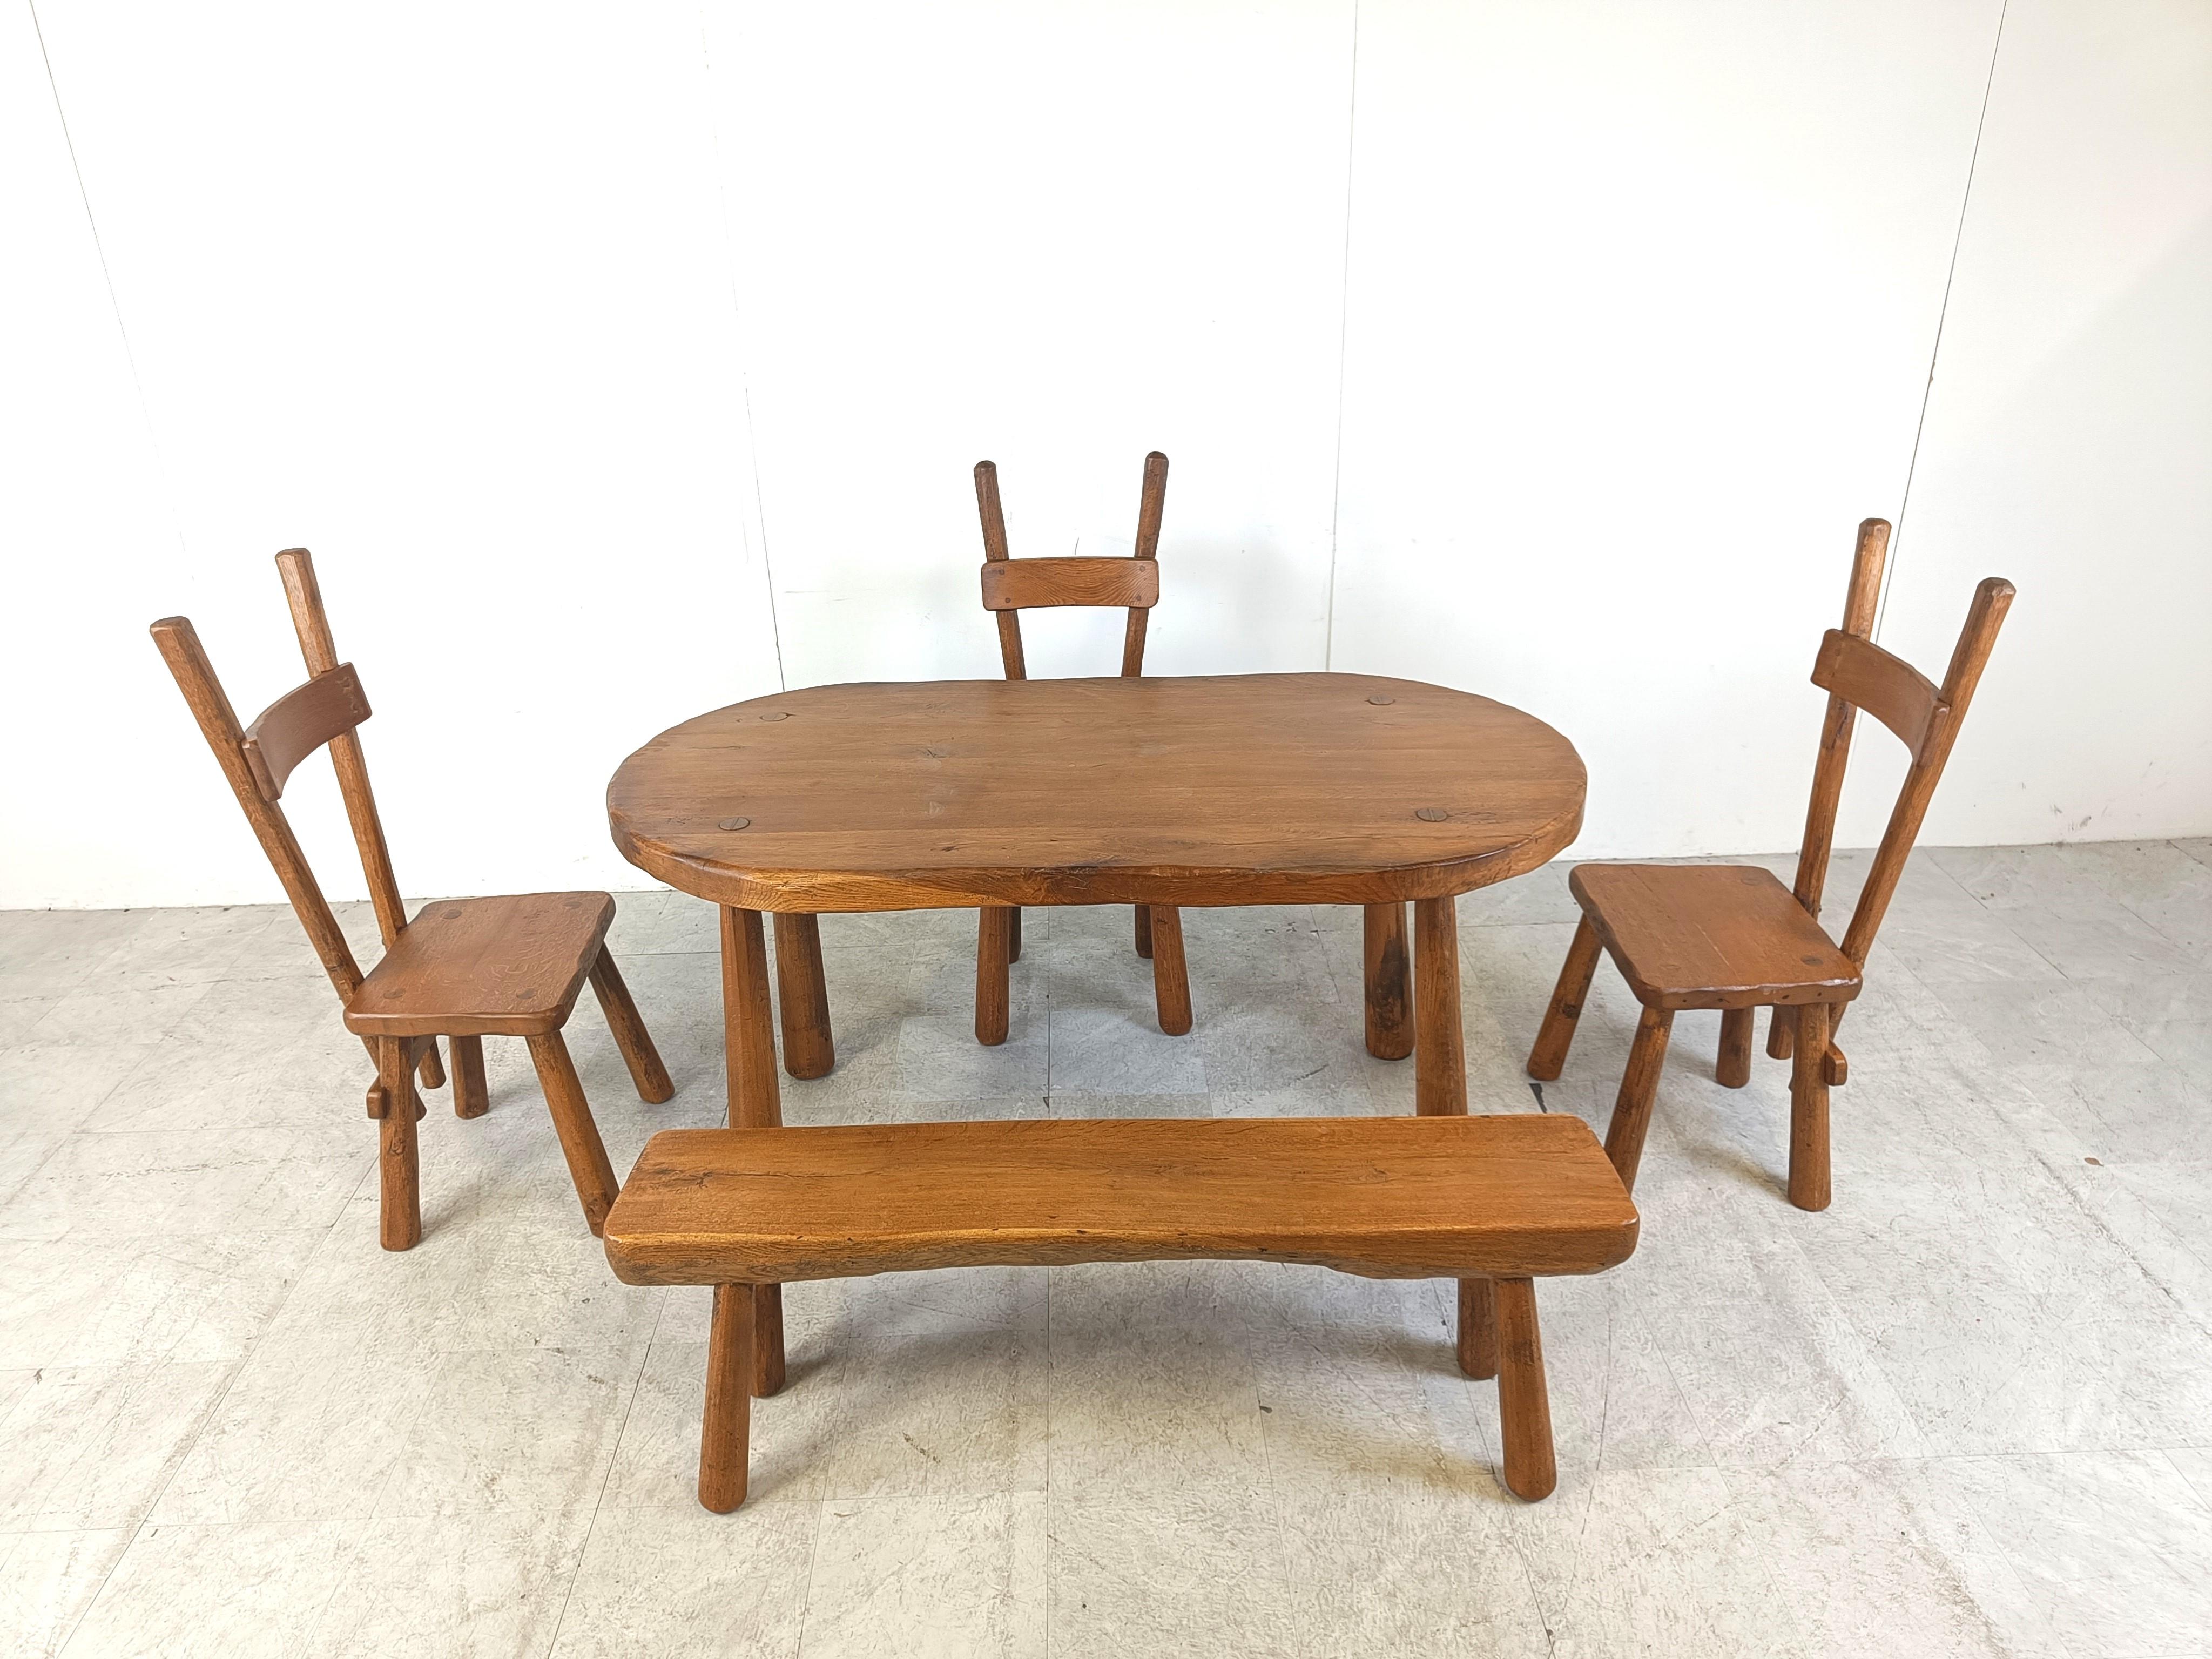 Sturdy and handcrafted dining set with a bench and three high back dining chairs.

This striking design and 'rough' hand made brutalist style is really standing out. 

The entire set is made out of solid oak.

Beautiful split backs with interlocking